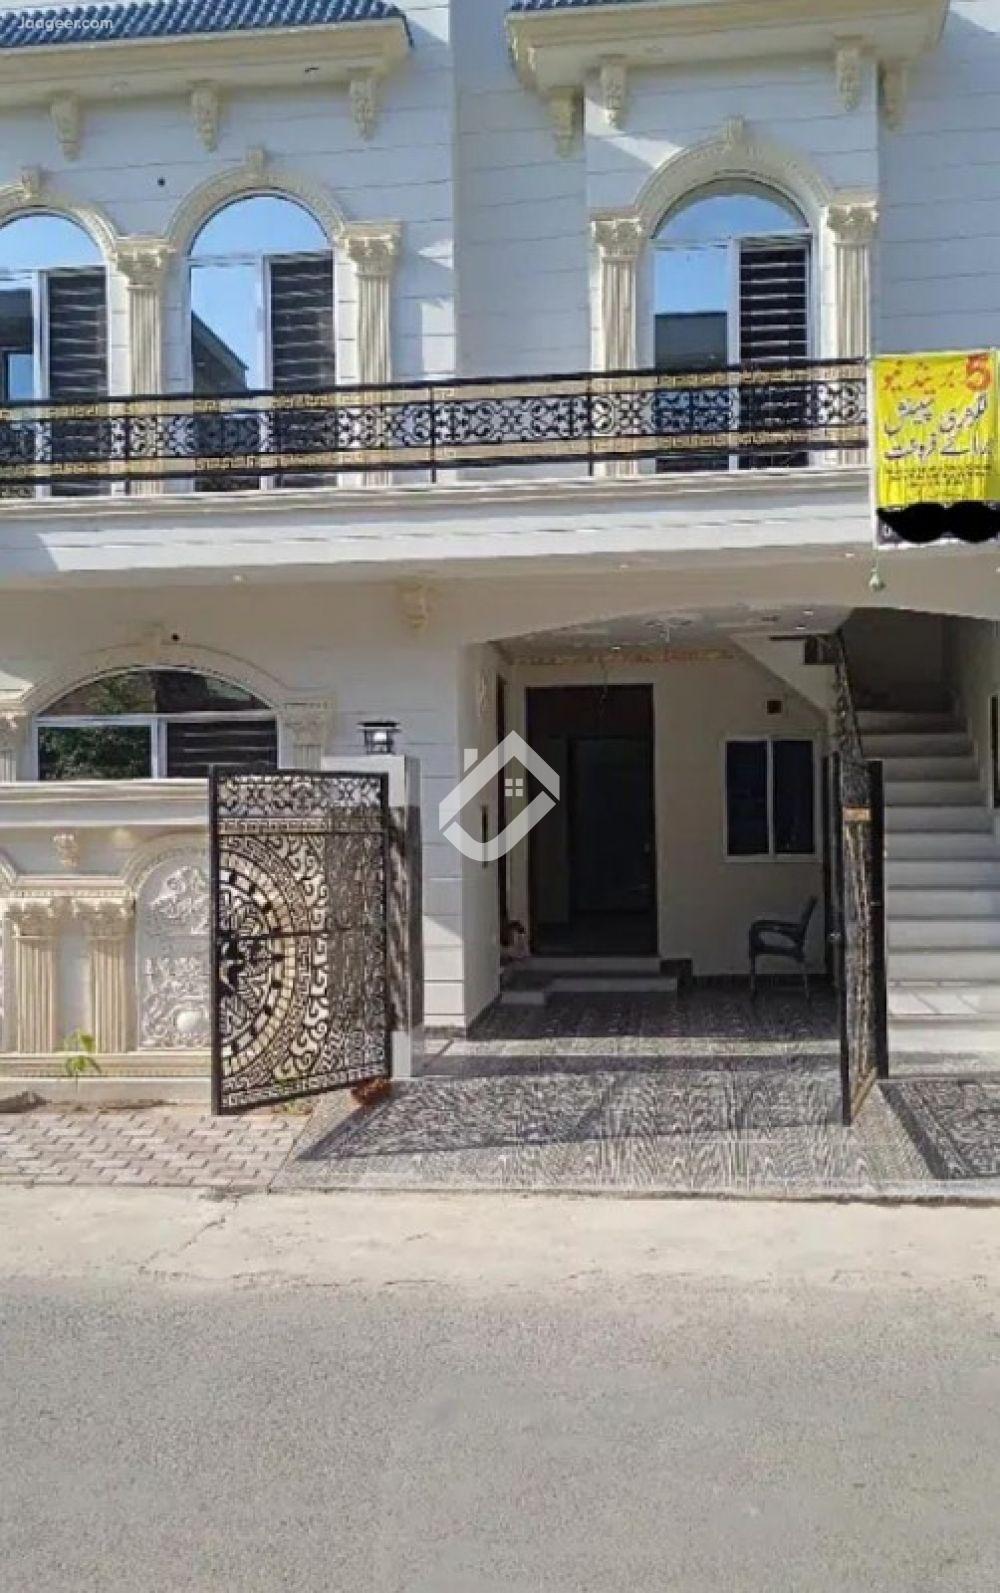 View  5 Marla Double Storey House For Sale In Al Rehman Garden Phase 2  in Al Rehman Garden Phase 2, Lahore